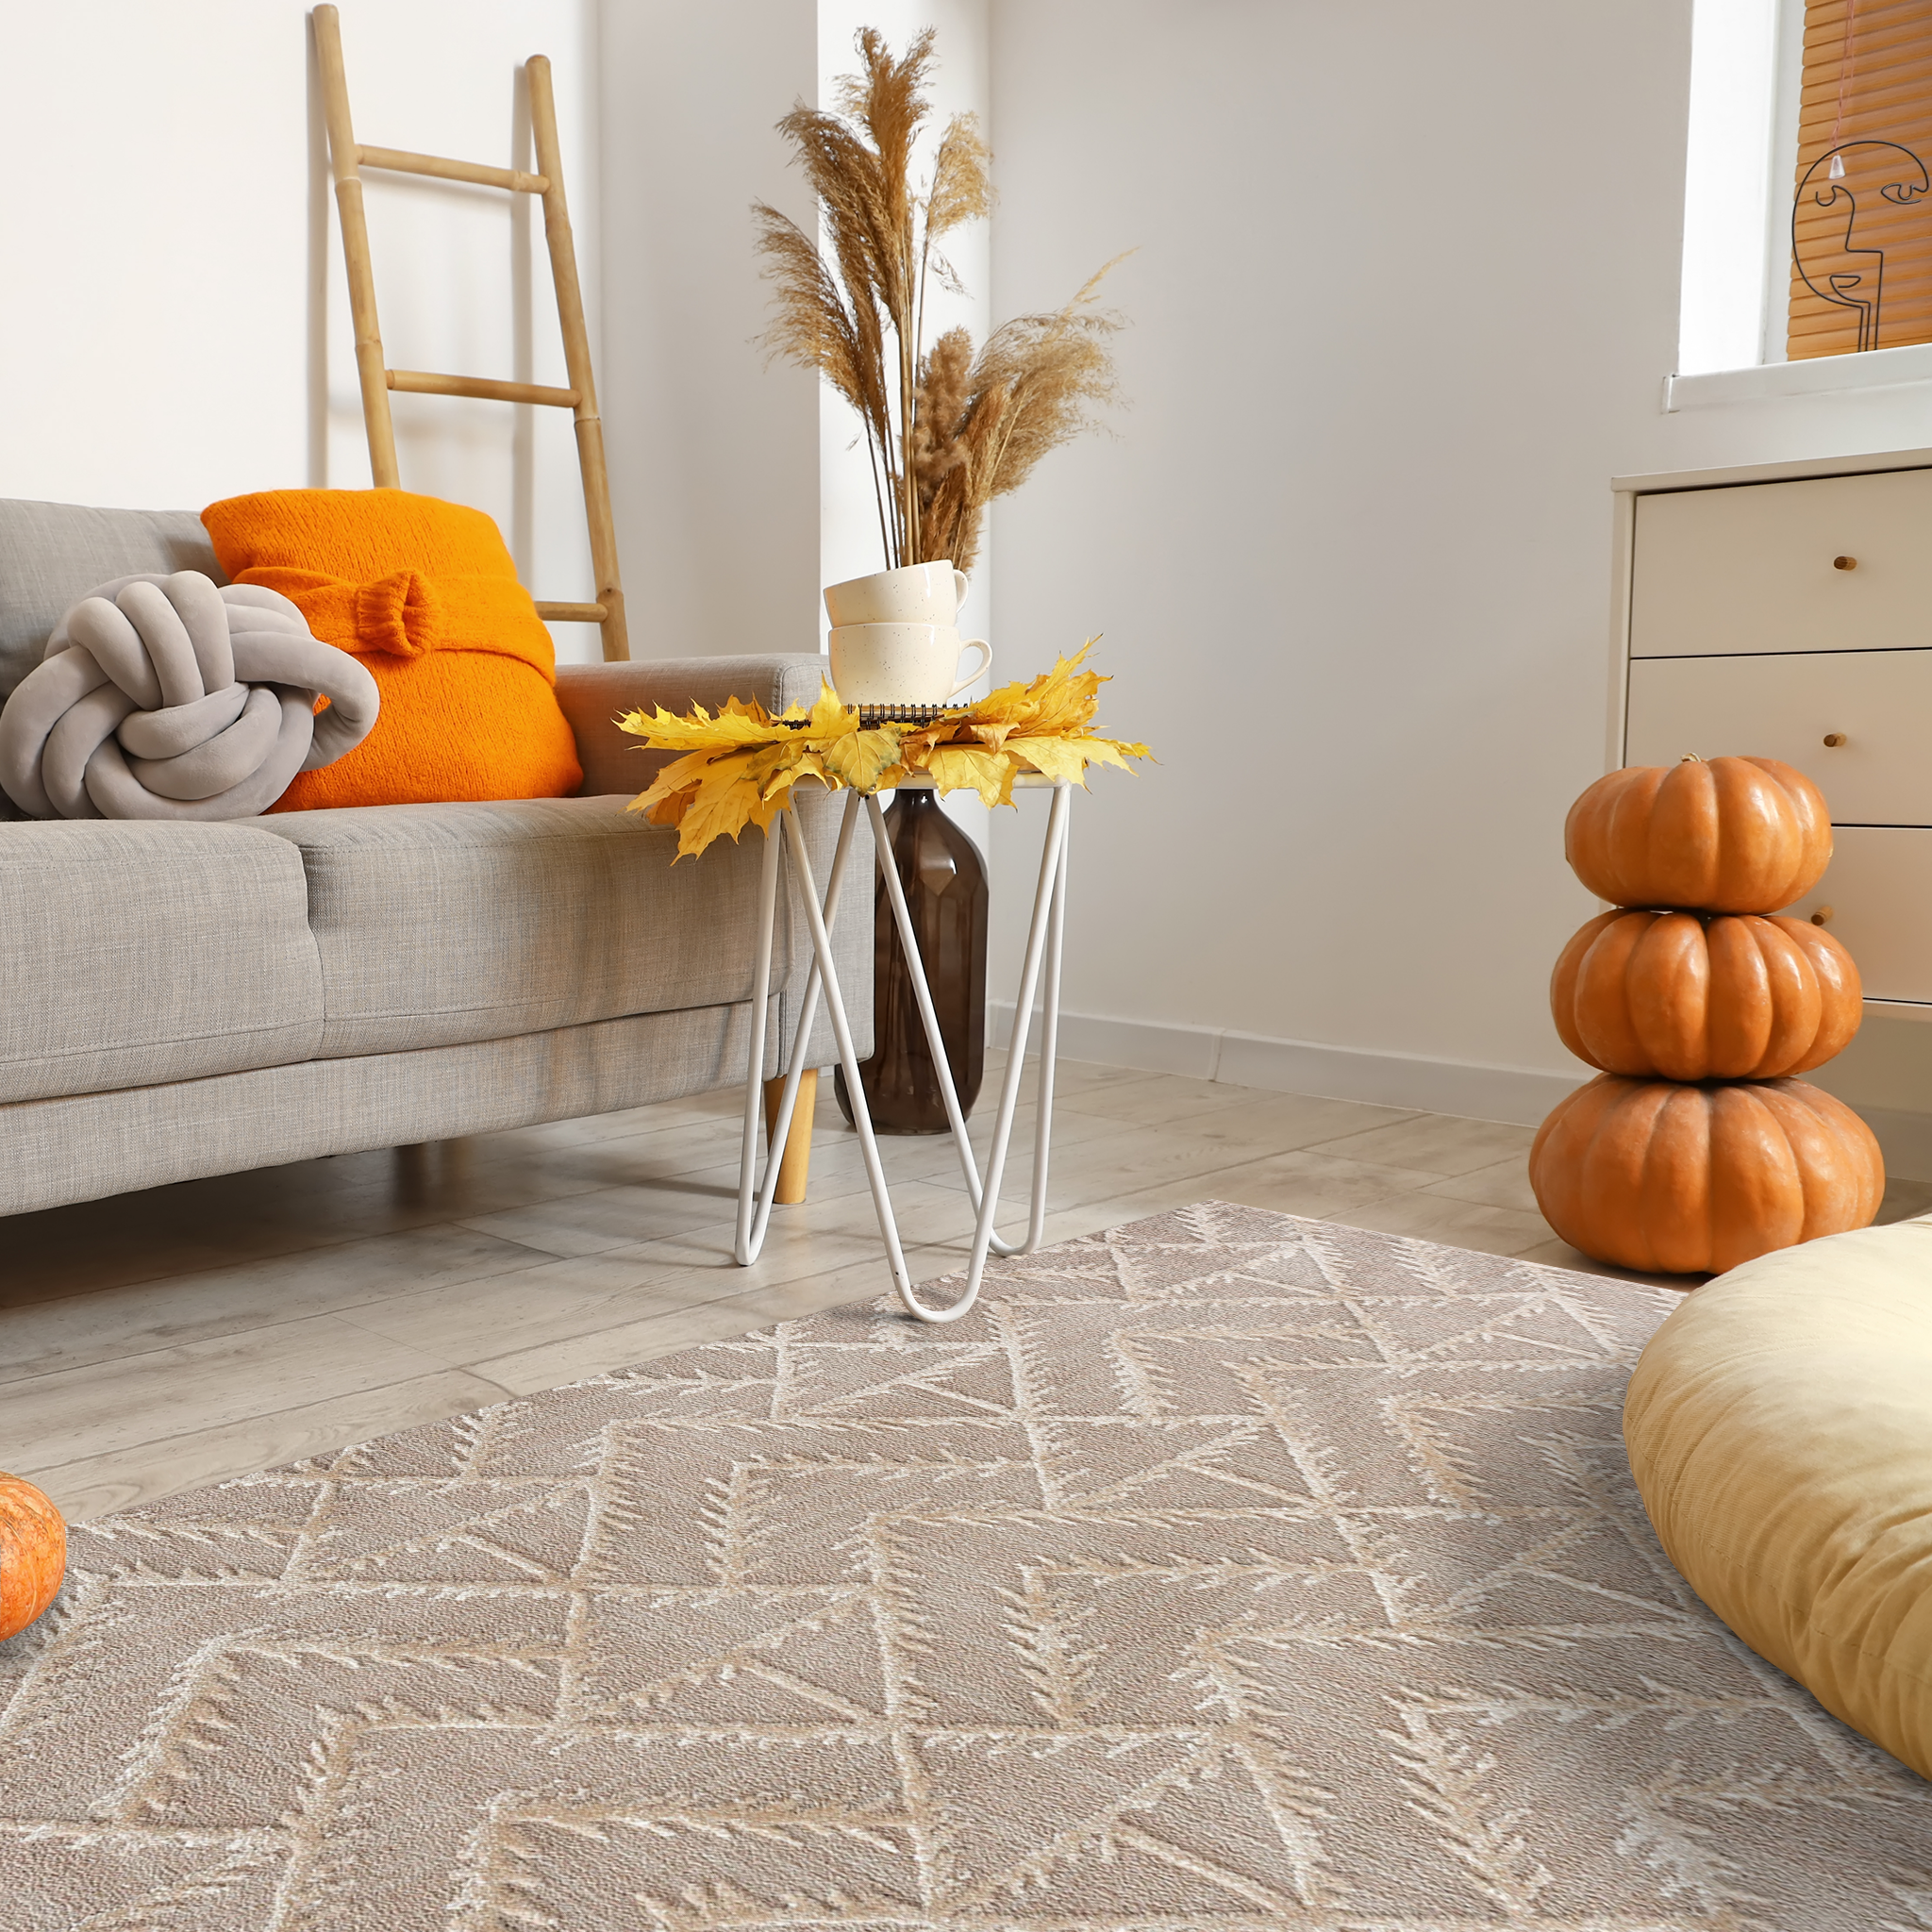 Cozy autumn family room with vibrant fall decor including beige sofa, pumpkins stack, dried leaves, coffee table and Geometric Tufted Rug